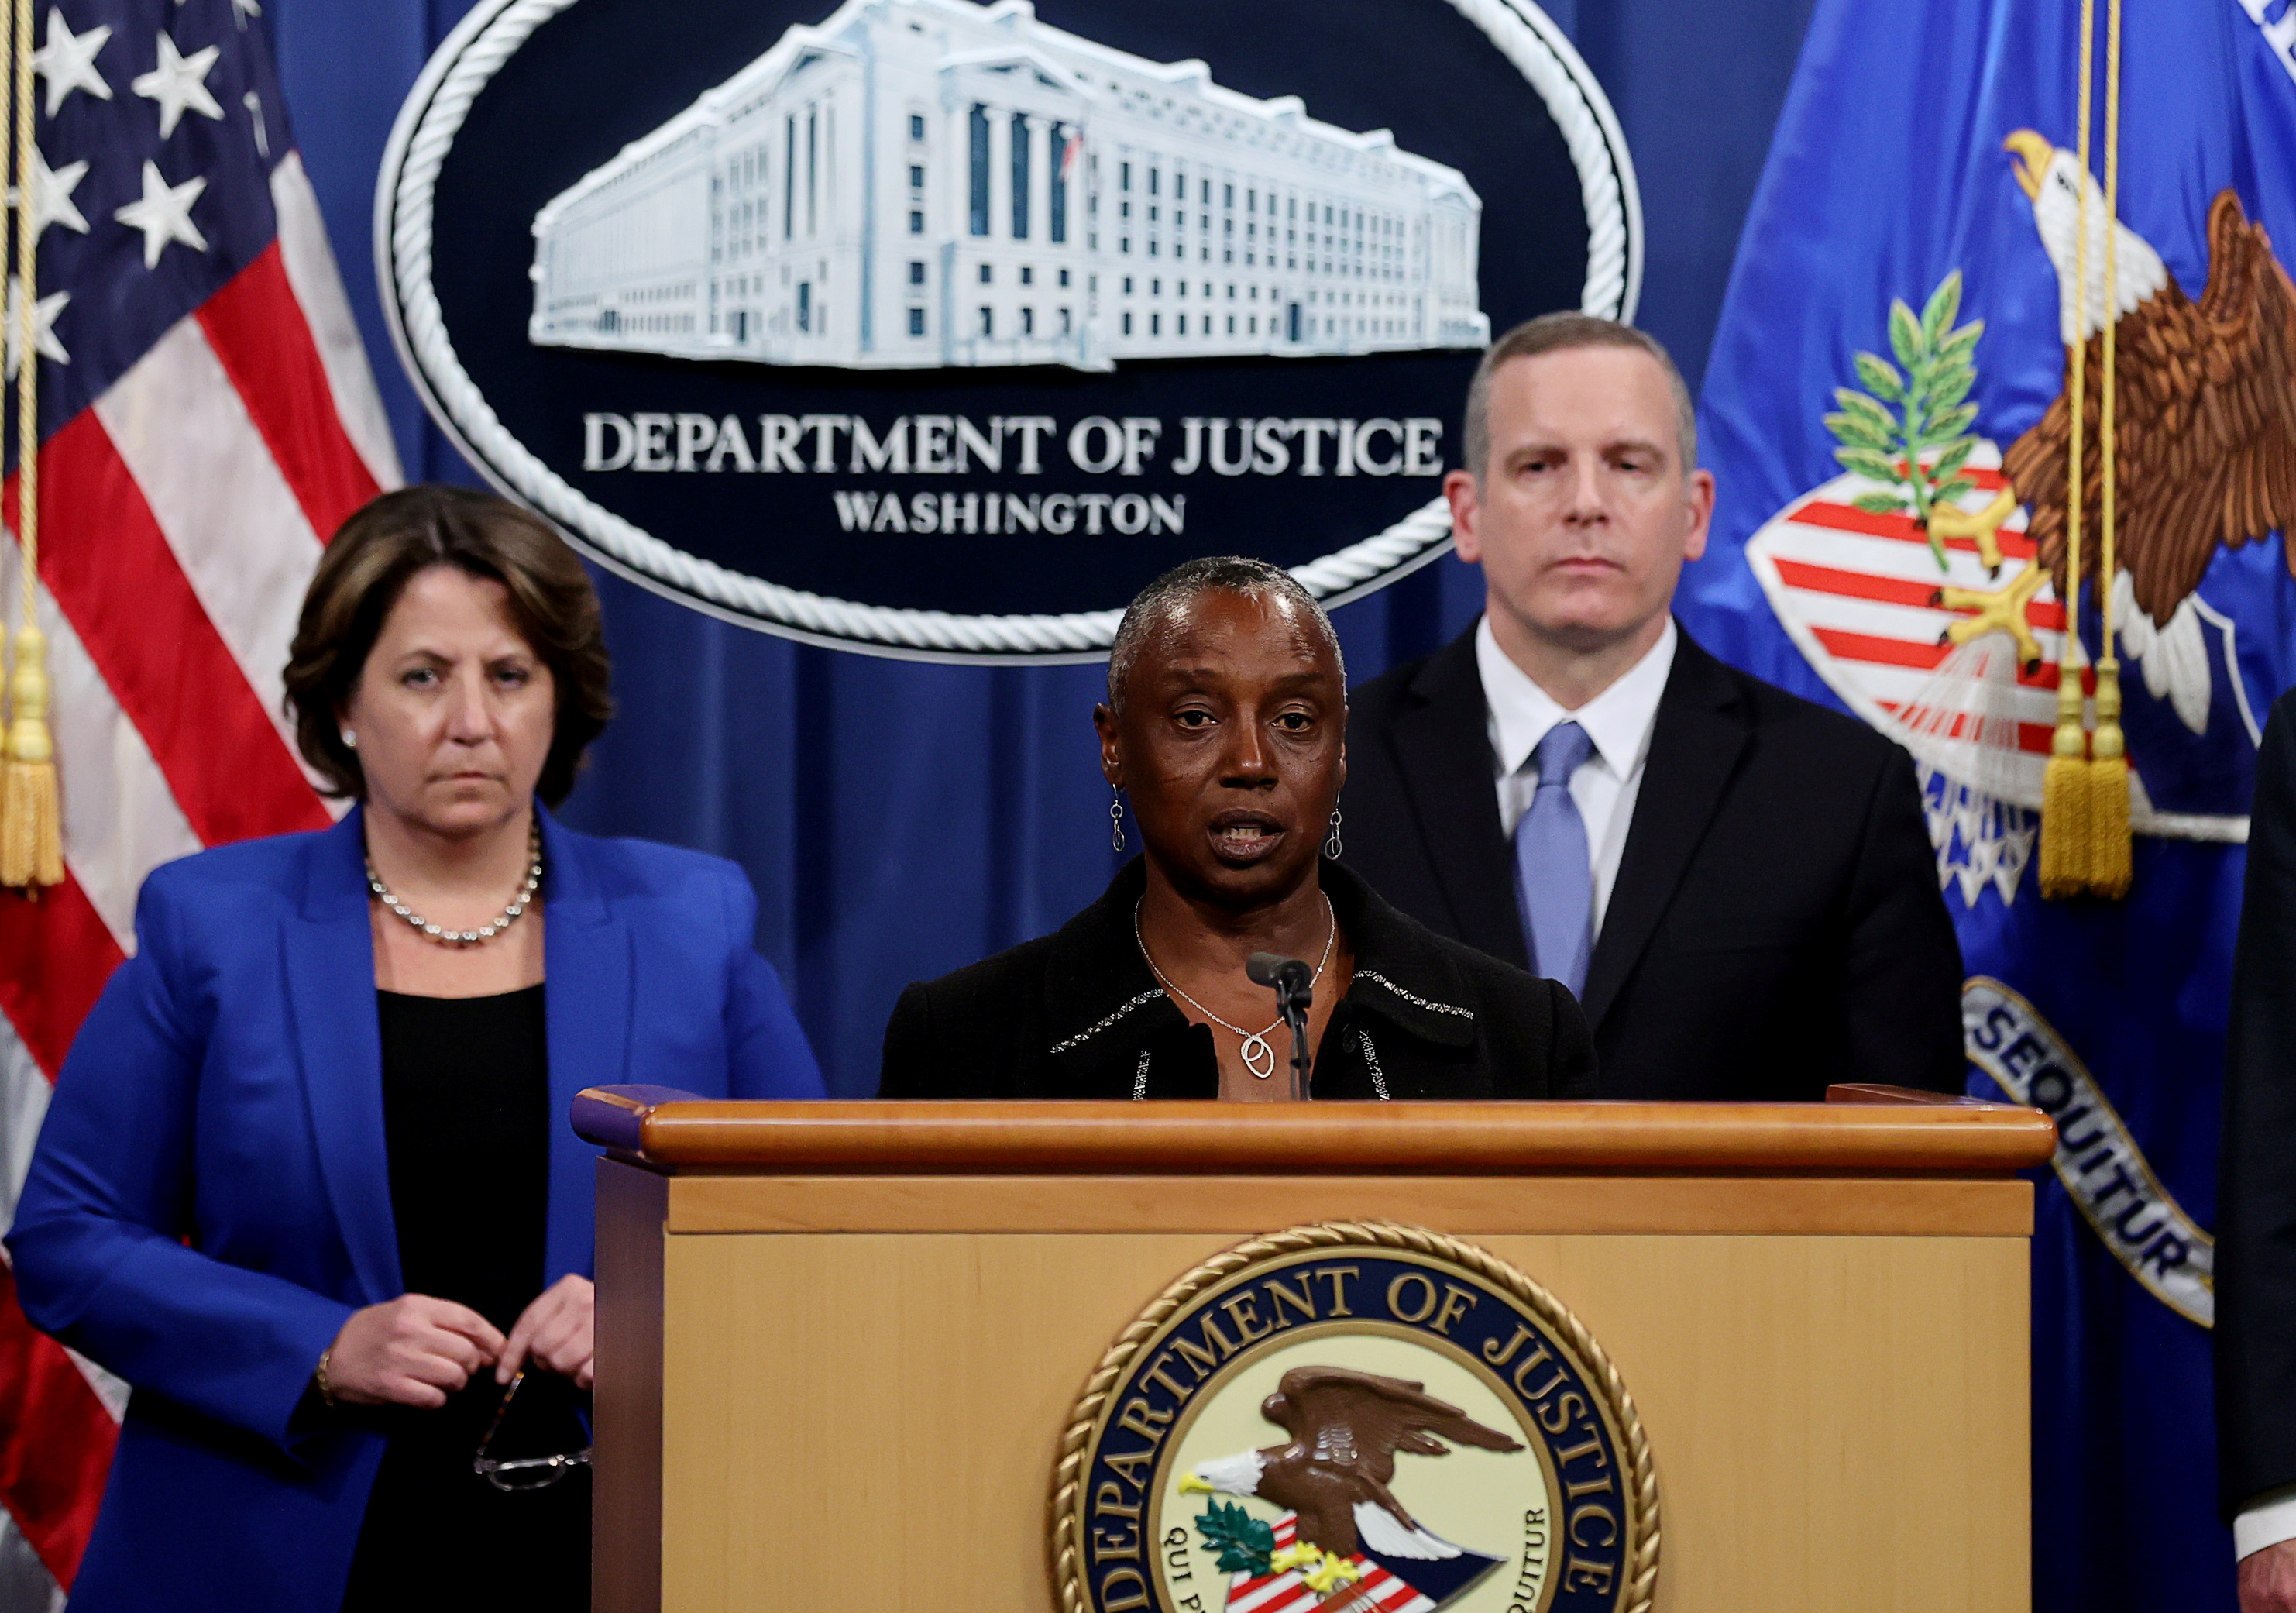 Acting U.S. Attorney for the Northern District of California Stephanie Hinds speaks about the Colonial Pipeline ransomware attack during a news conference with Deputy U.S. Attorney General Lisa Monaco and FBI Deputy Director Paul Abbate at the Justice Department in Washington, U.S., June 7, 2021. REUTERS/Jonathan Ernst/Pool/File Photo